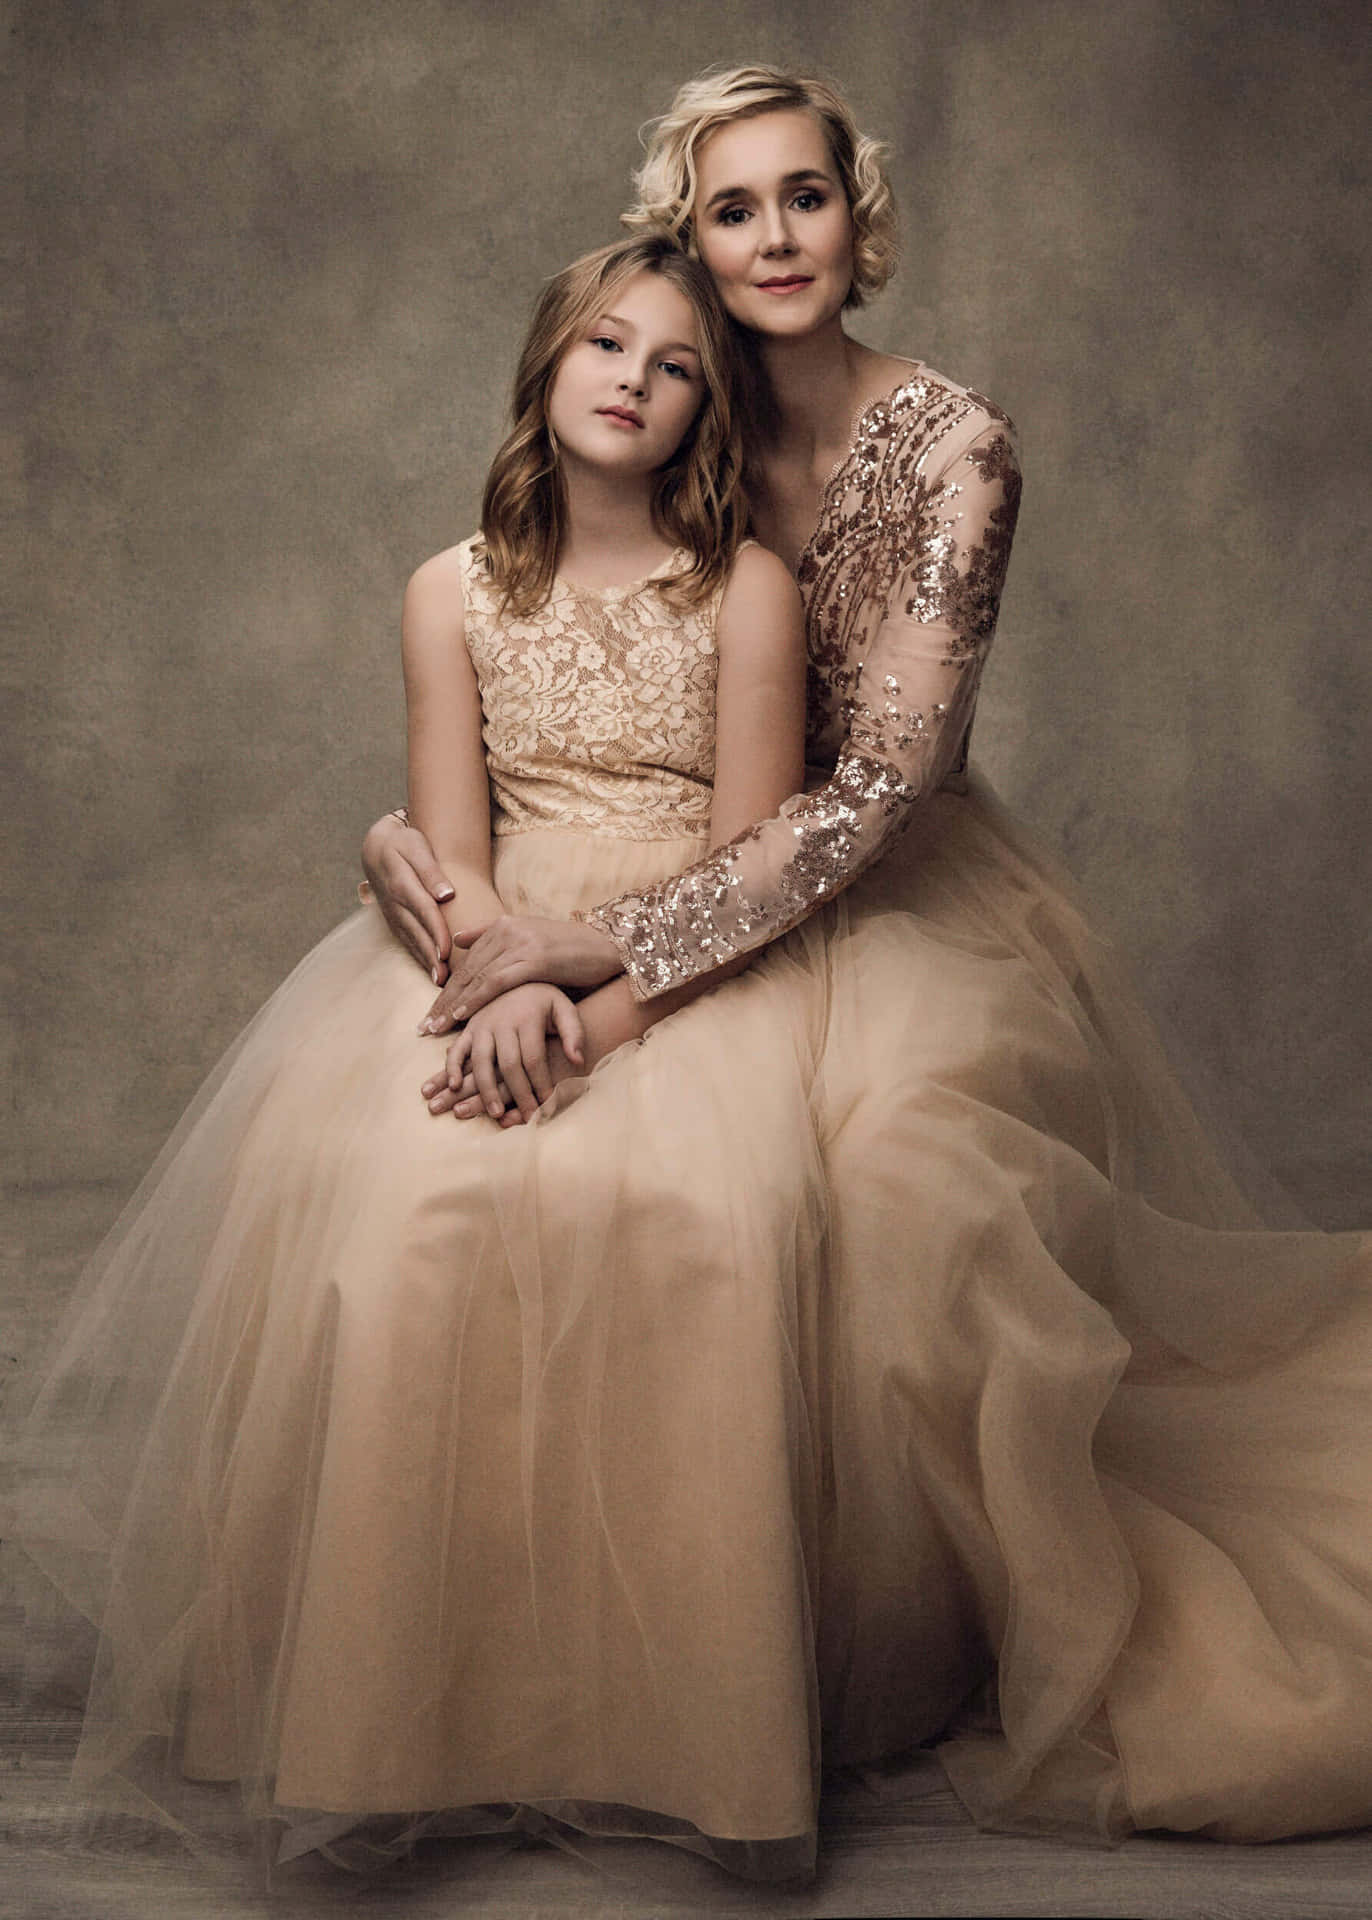 A Woman And Her Daughter In A Golden Dress